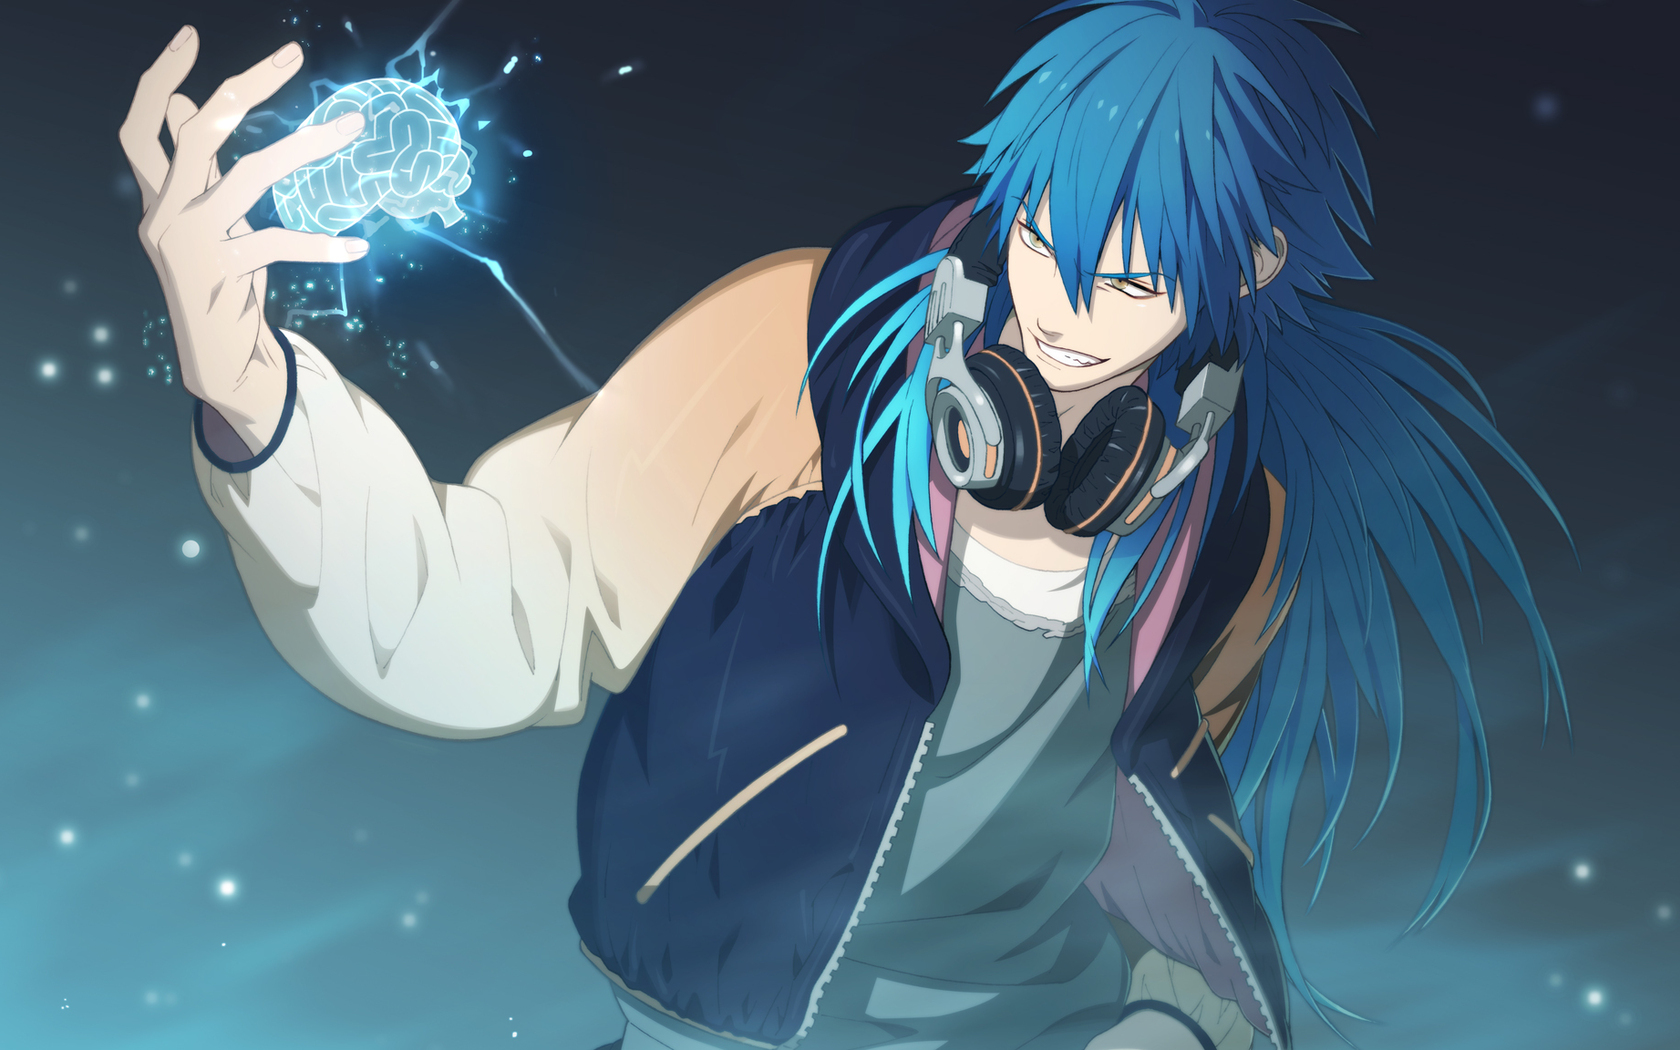 Cute Anime Boy with Blue Hair and Neko Features - wide 3